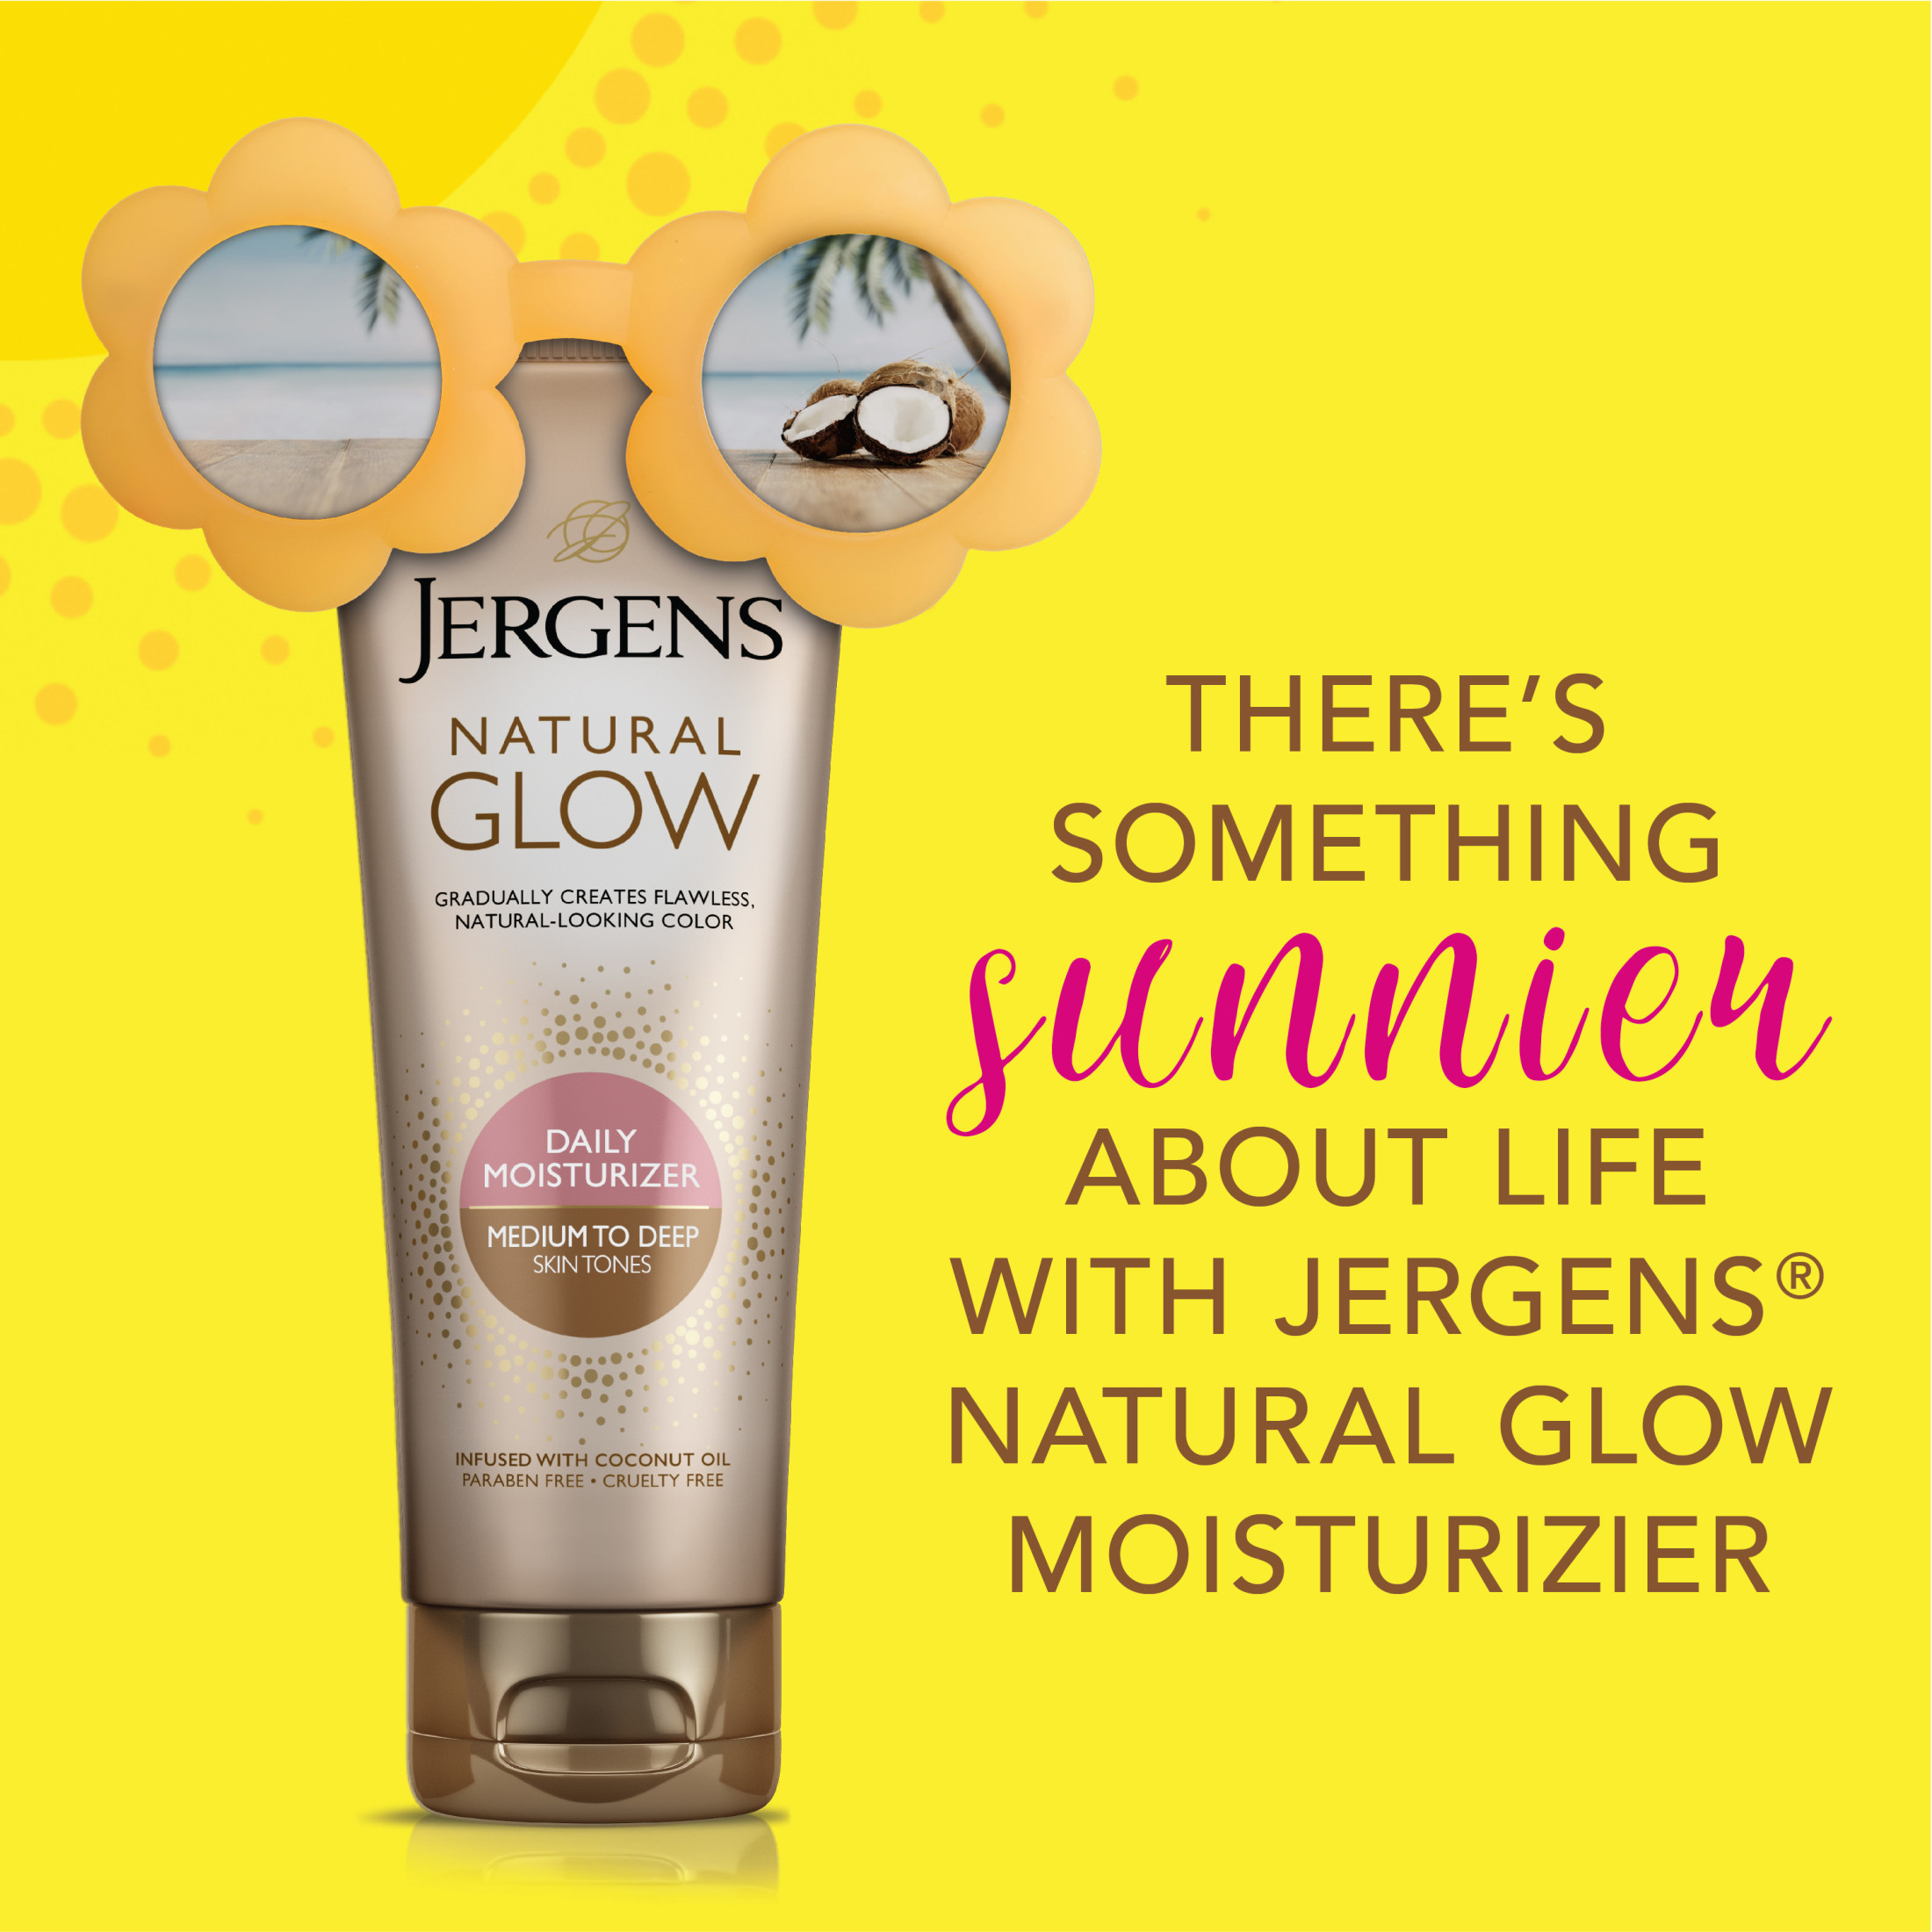 Jergens Natural Glow Sunless Tanning Daily Body Lotion, Medium to Deep Skin Tone, 7.5 fl oz - image 5 of 11